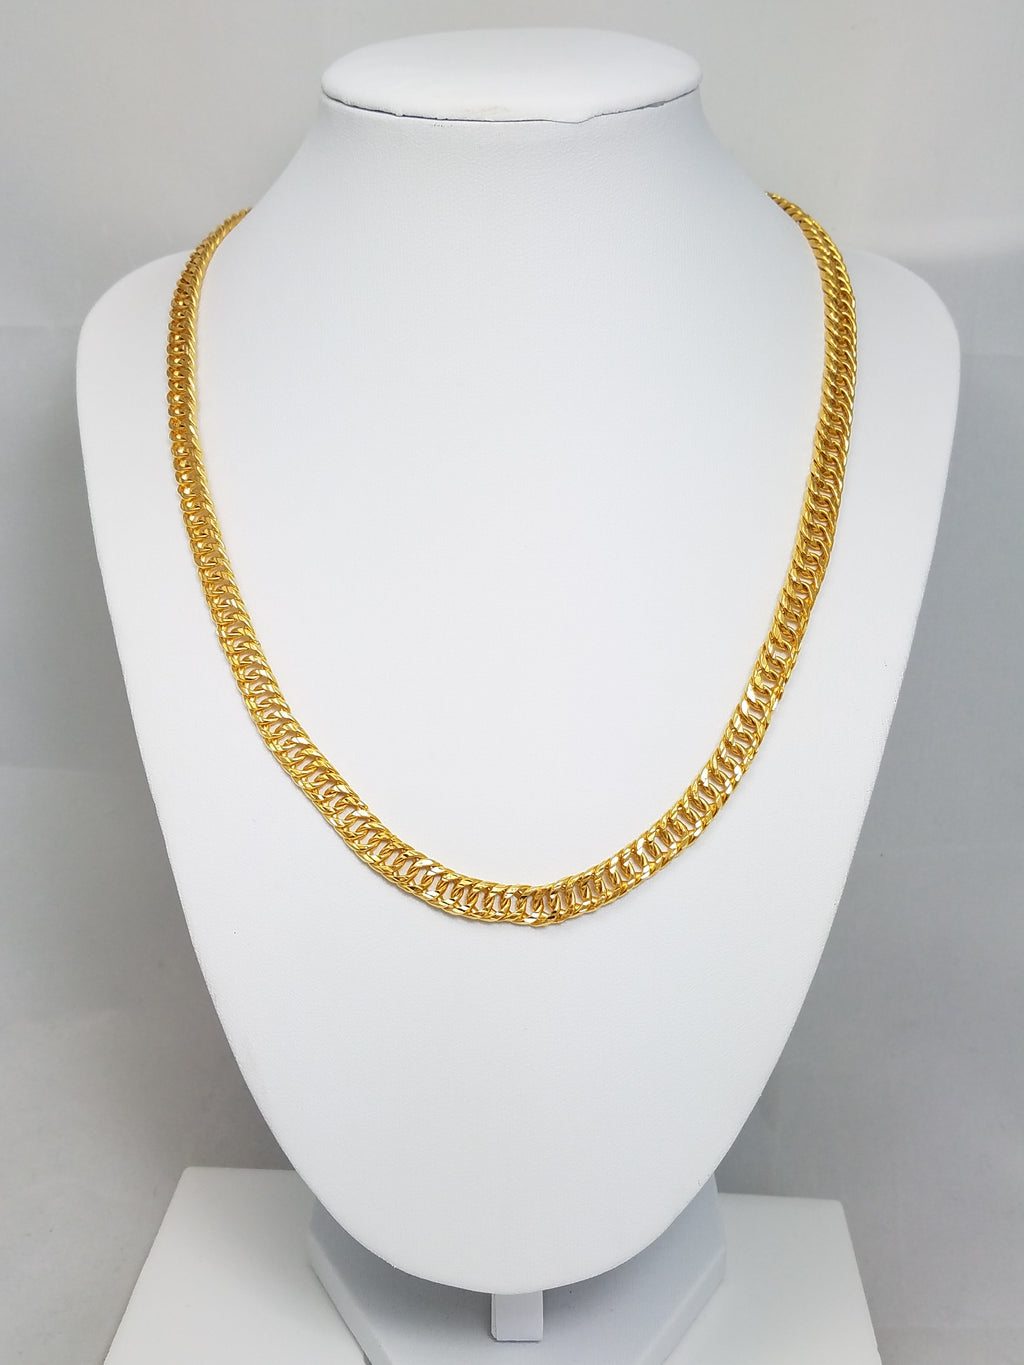 19" 24k (995) Hollow Yellow Gold Link Chain Necklace